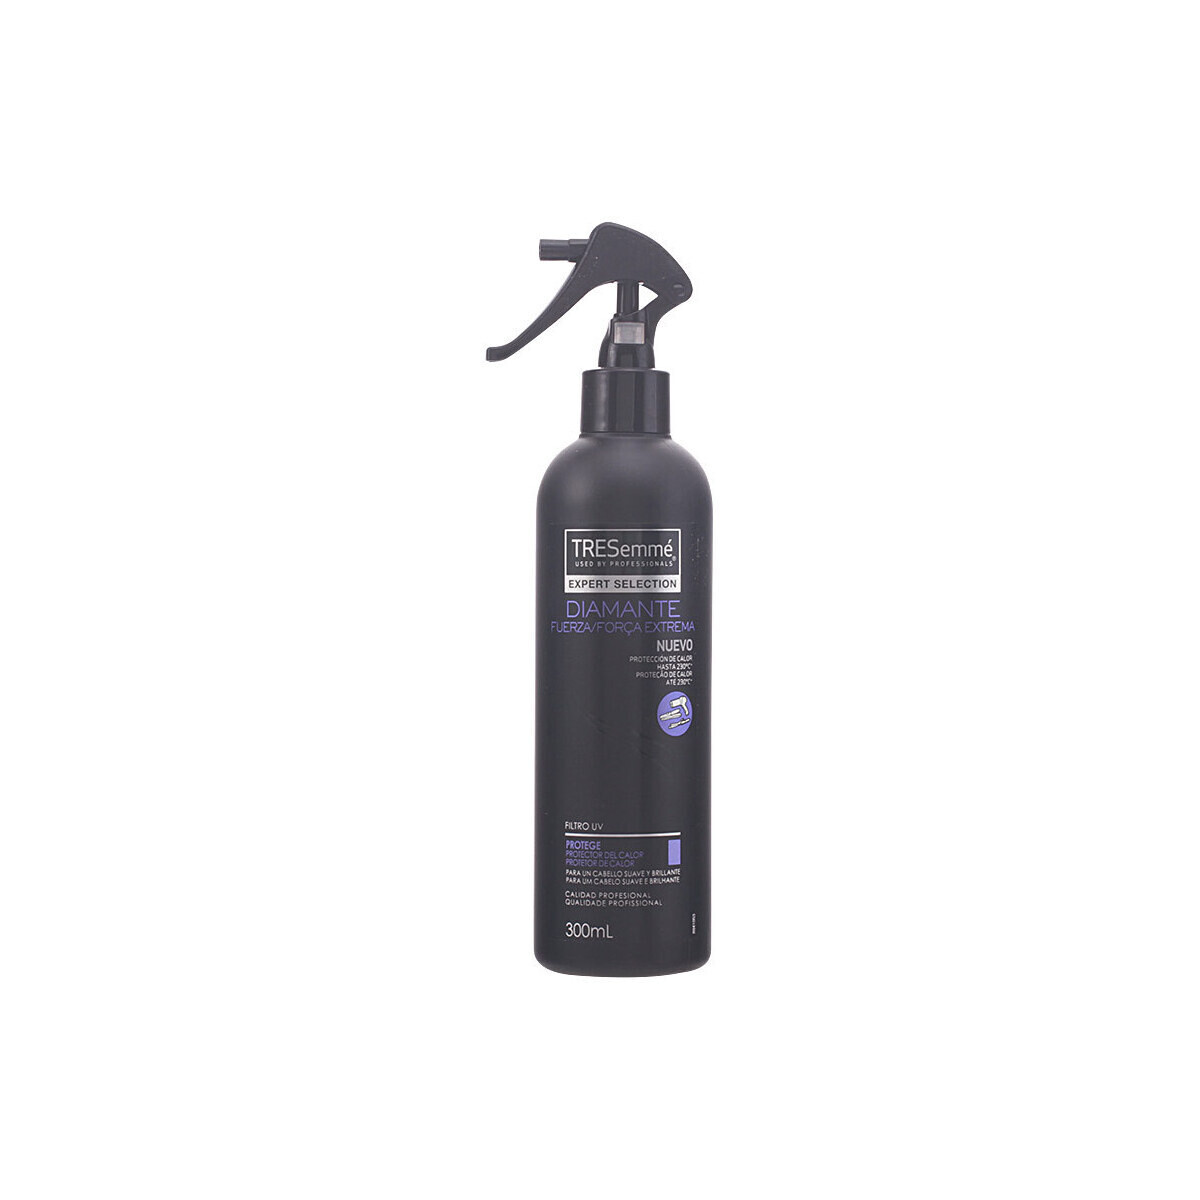 Beauty Haarstyling Tresemme Diamante Fuerza Extrema Protector Del Calor 